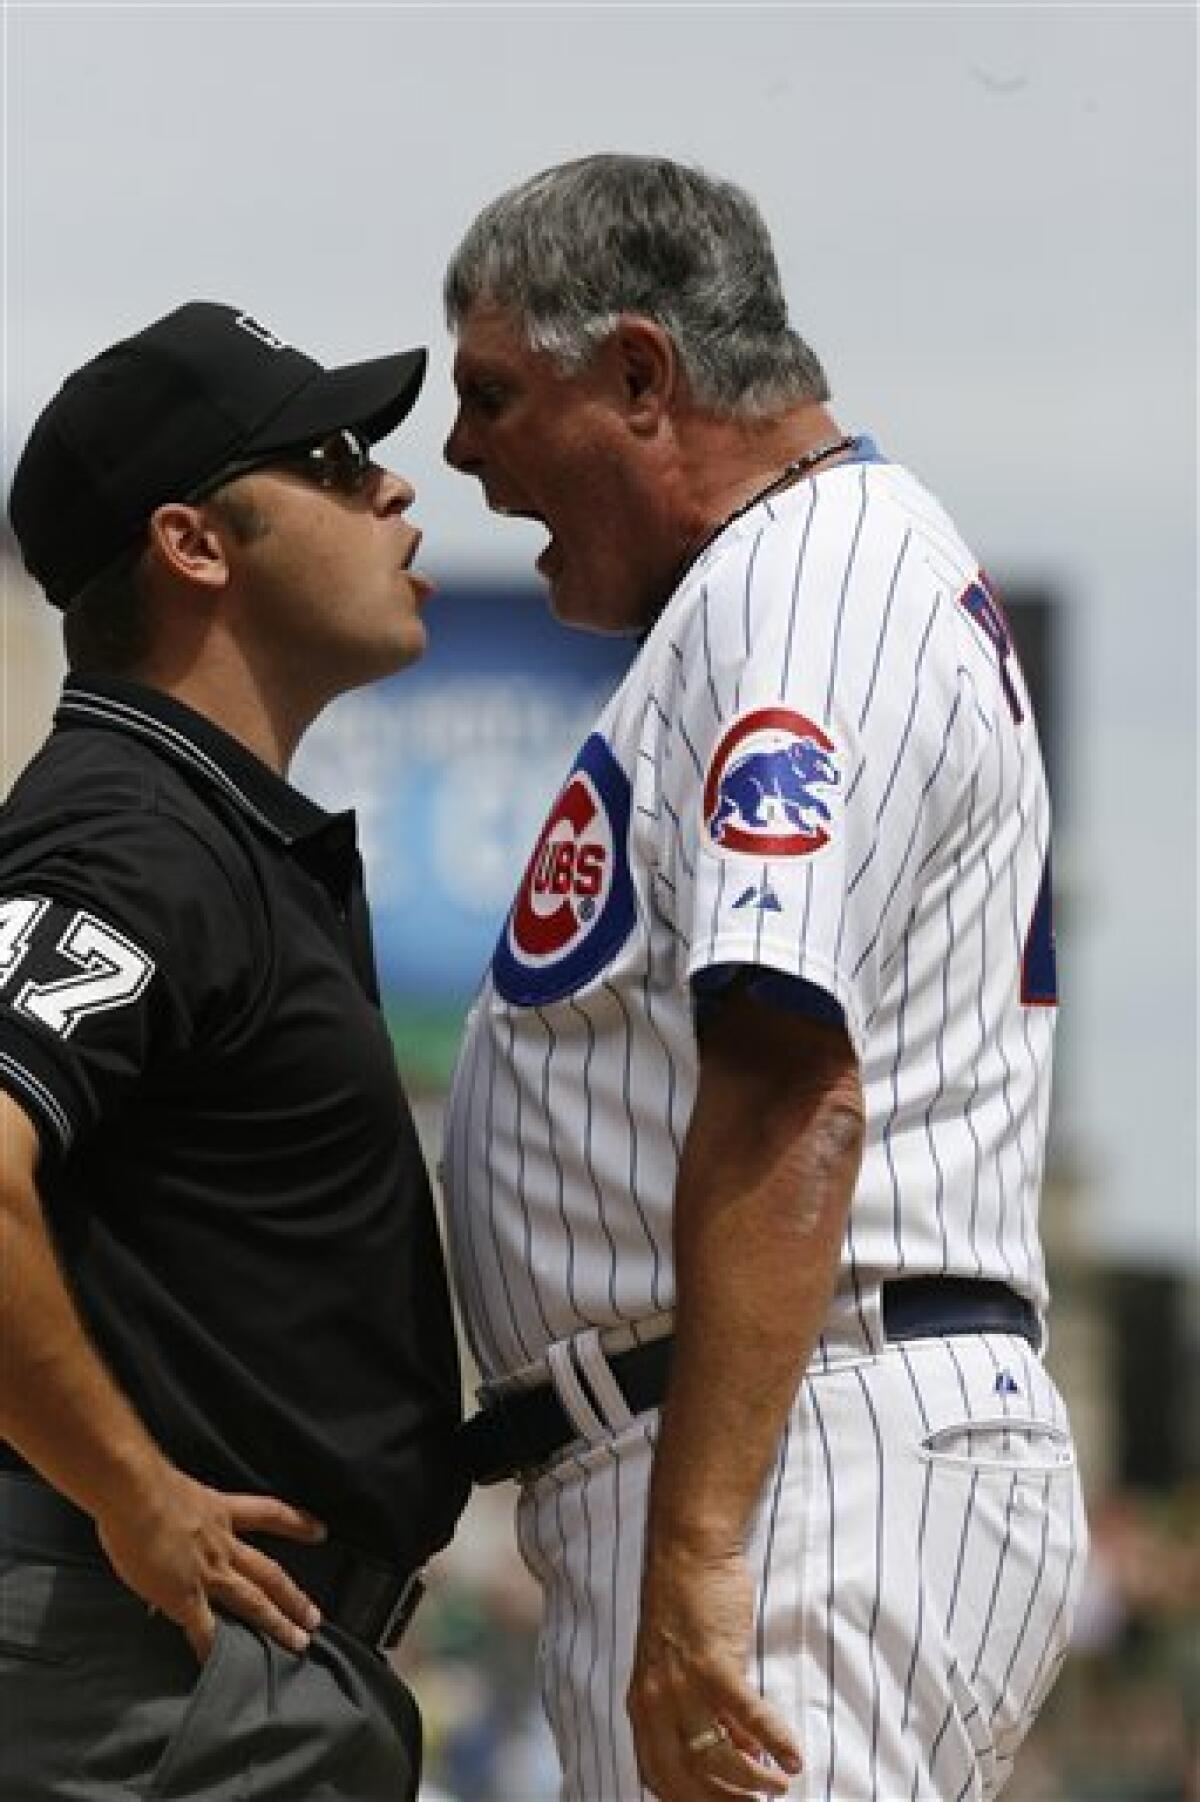 Chicago Cubs manager Lou Piniella walks the dugout during the